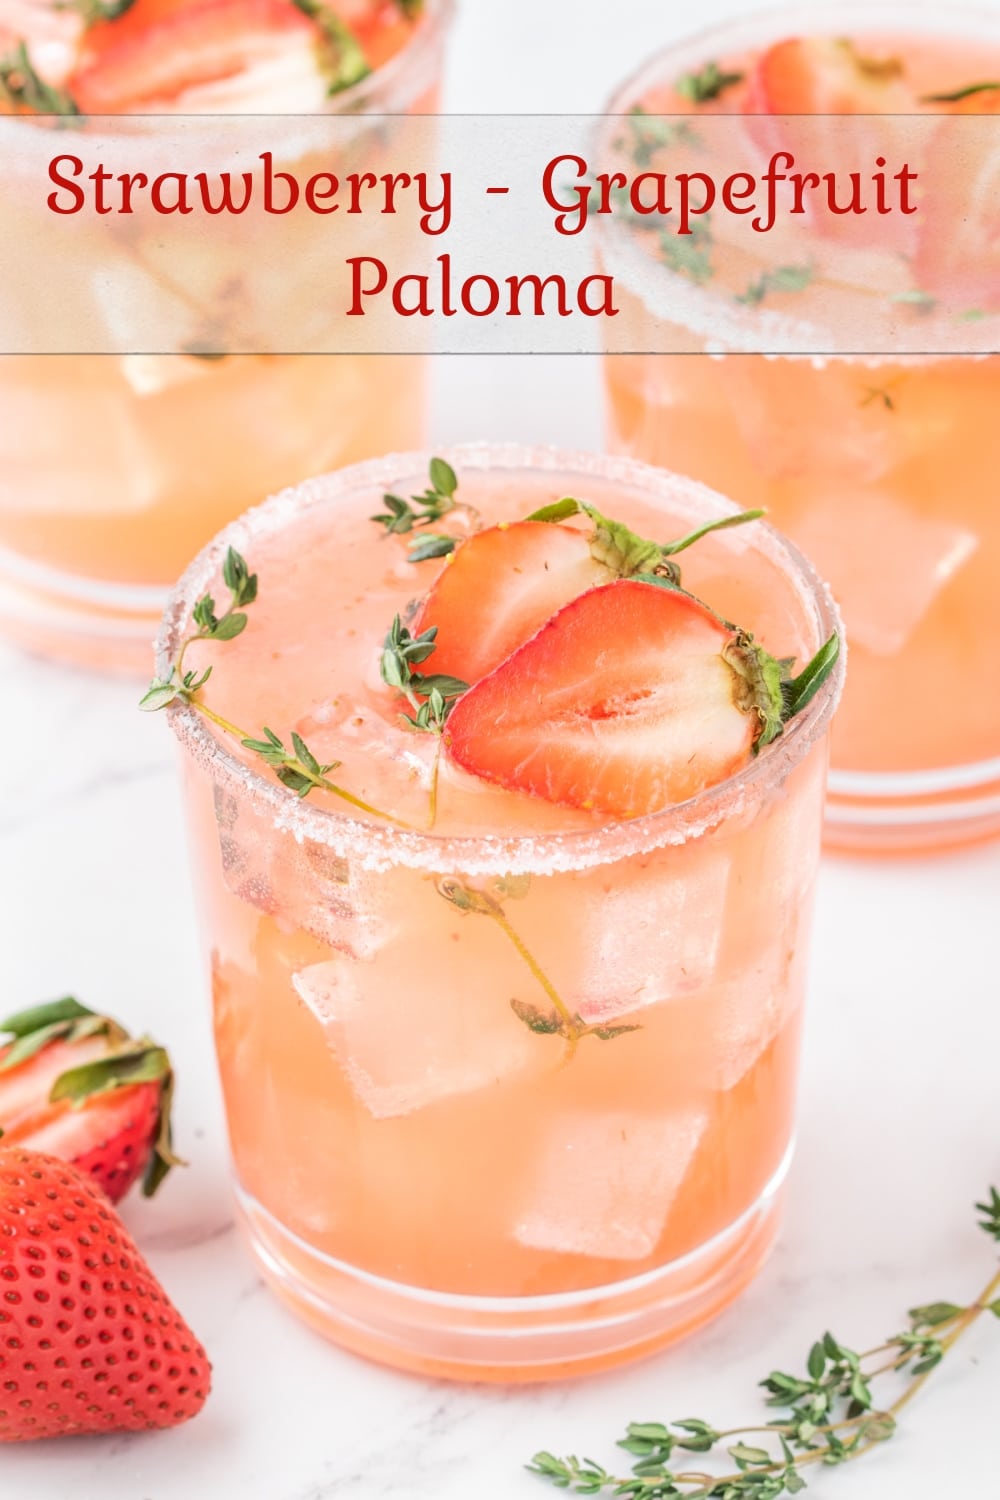 This fun and fizzy Strawberry Grapefruit Paloma is a refreshing and fruity twist on the classic Paloma cocktail we all know and love. With every sip, you'll appreciate and take notice of the perfect balance happening between the tart grapefruit and sweet strawberries. You're going to love this refreshing tequila based cocktail. via @cmpollak1